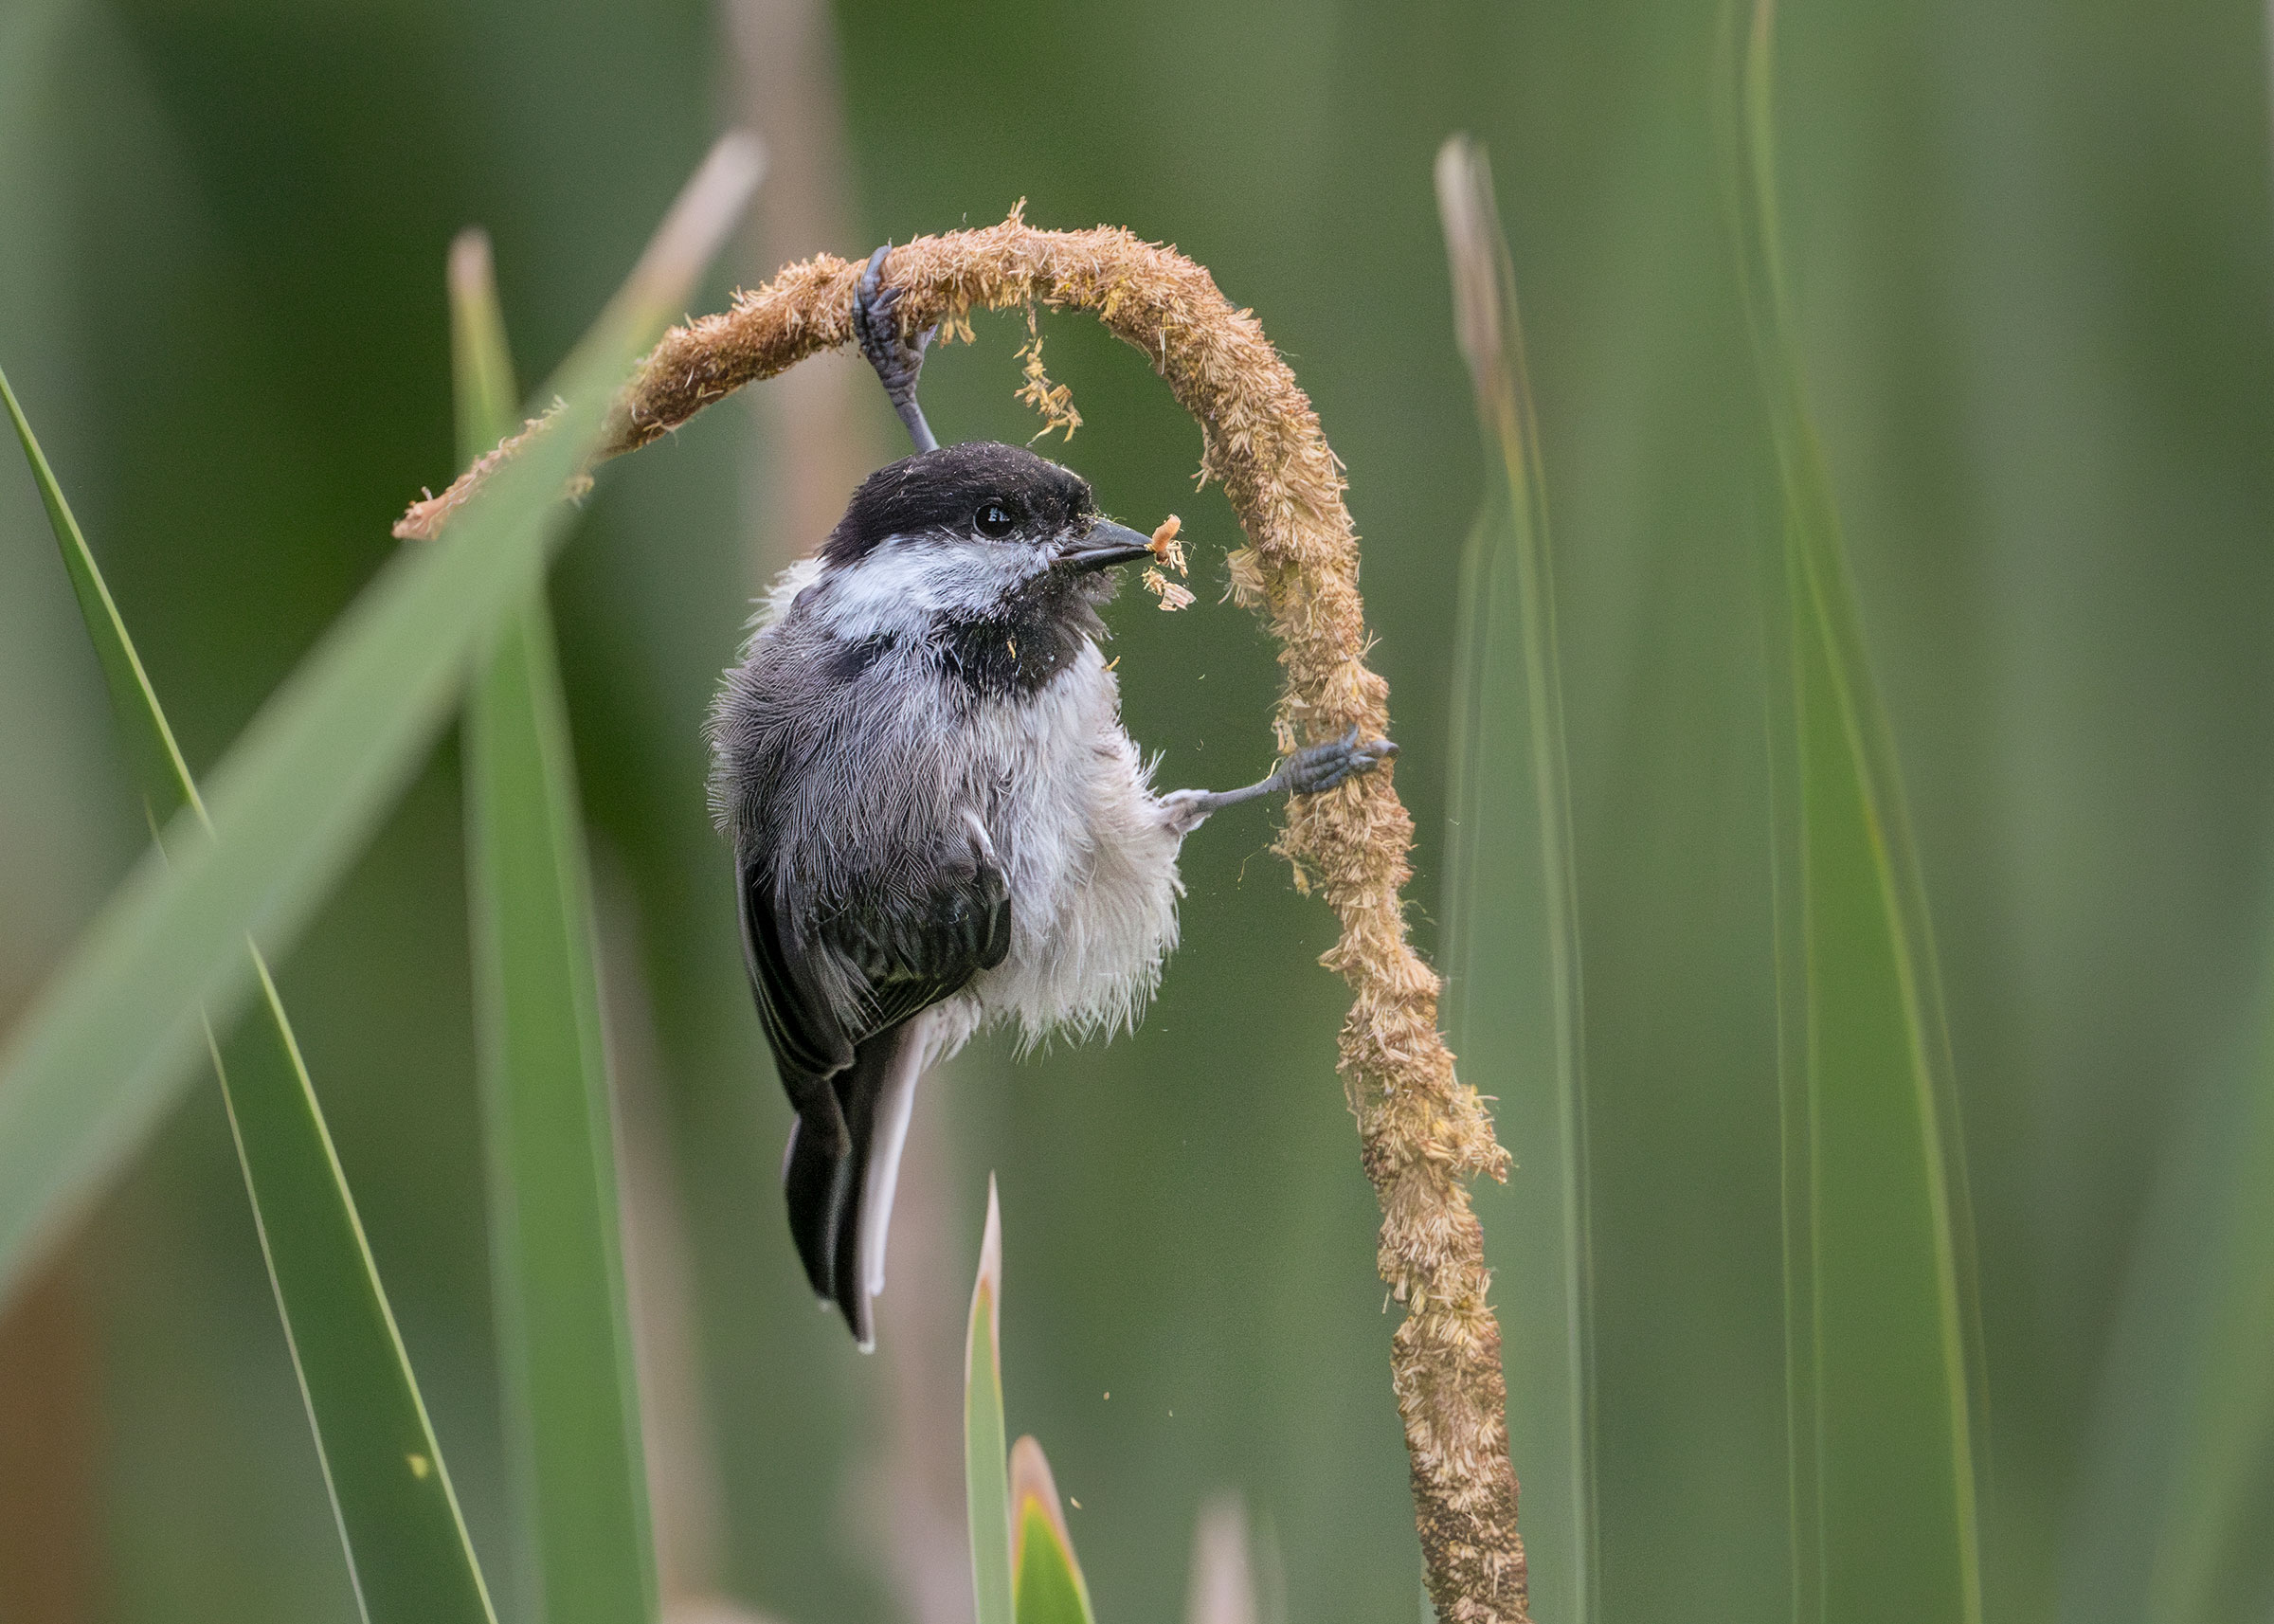 A Black-capped Chickadee clings to a single beige hook-shaped stem filled with seeds. The bird’s black legs appear to be spread at a 90-degree angle to hold the stem. The bird’s black bill is full of seeds.
